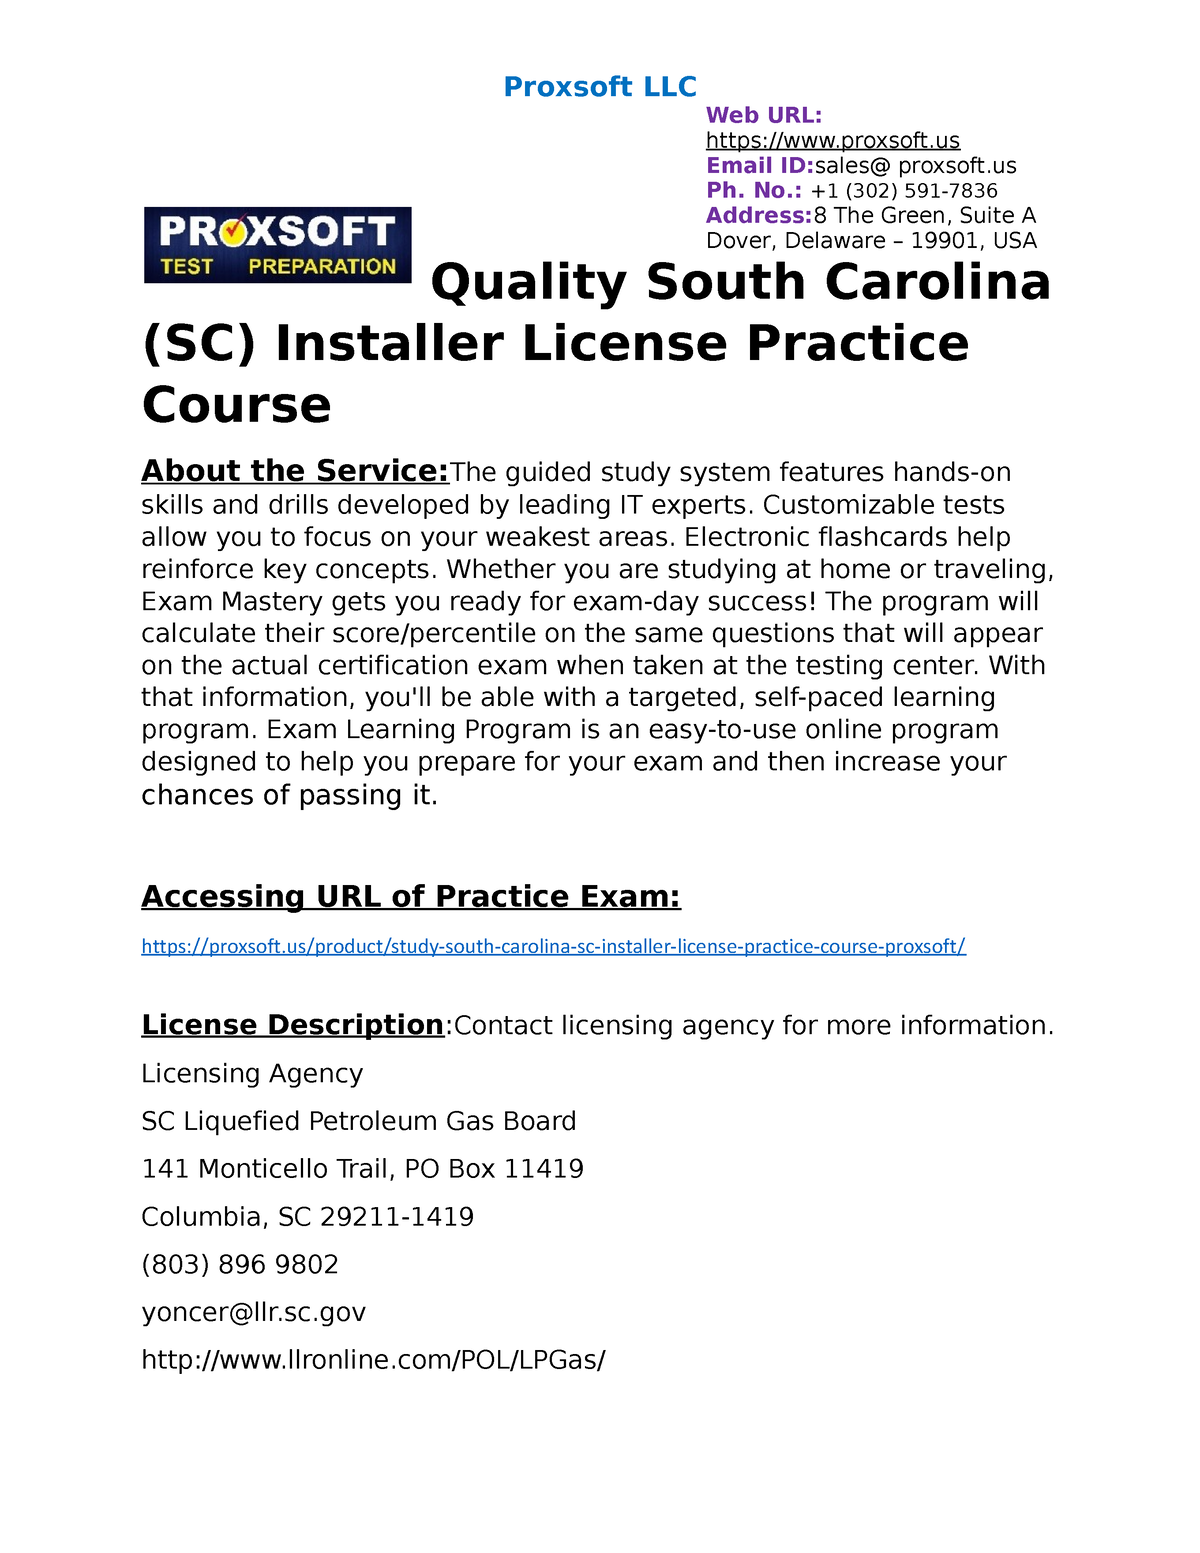 download the last version for apple South Carolina residential appliance installer license prep class